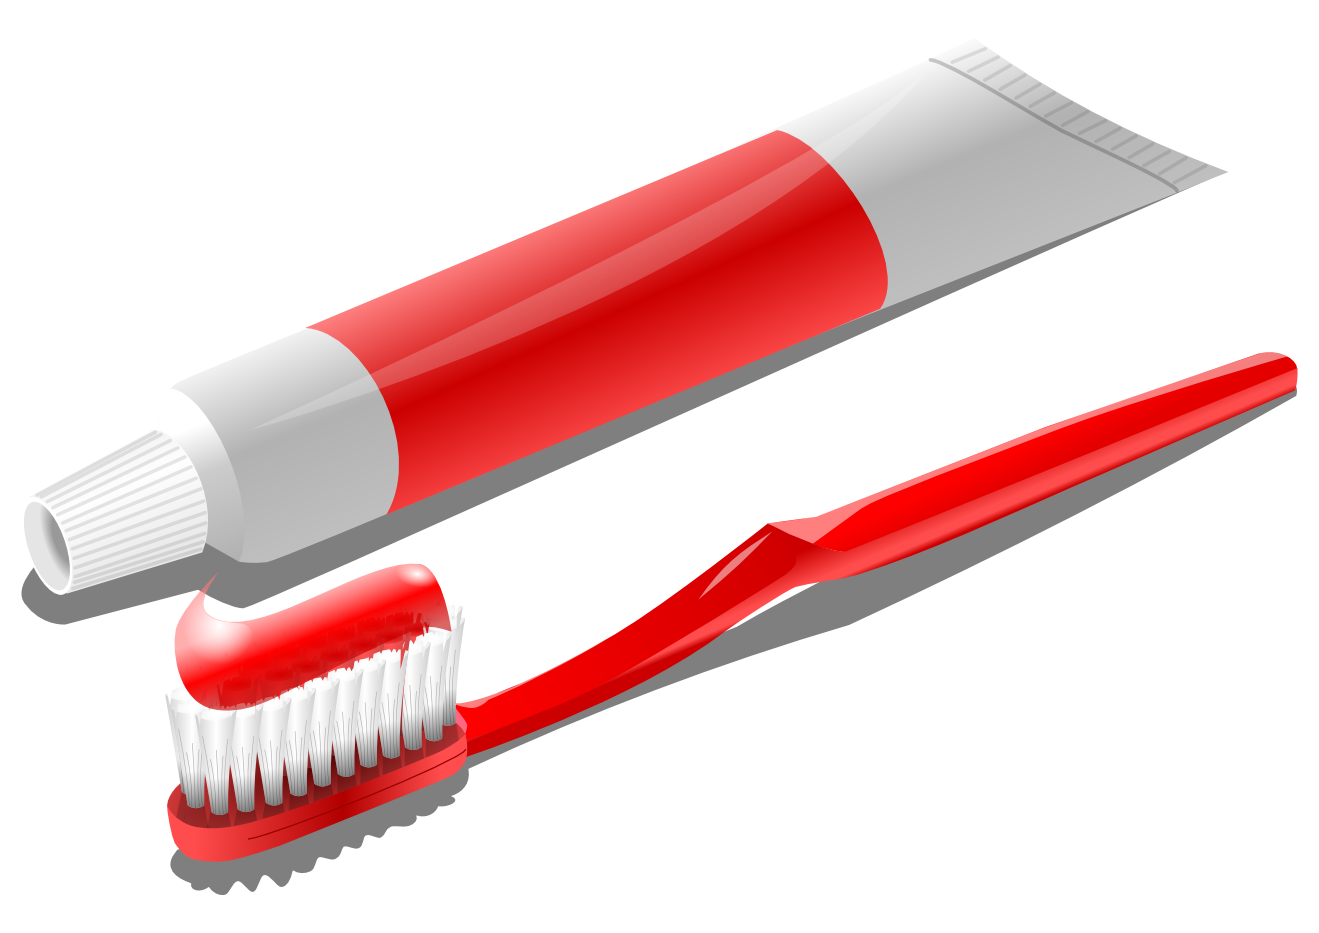 Toothbrush Clip Art PNG